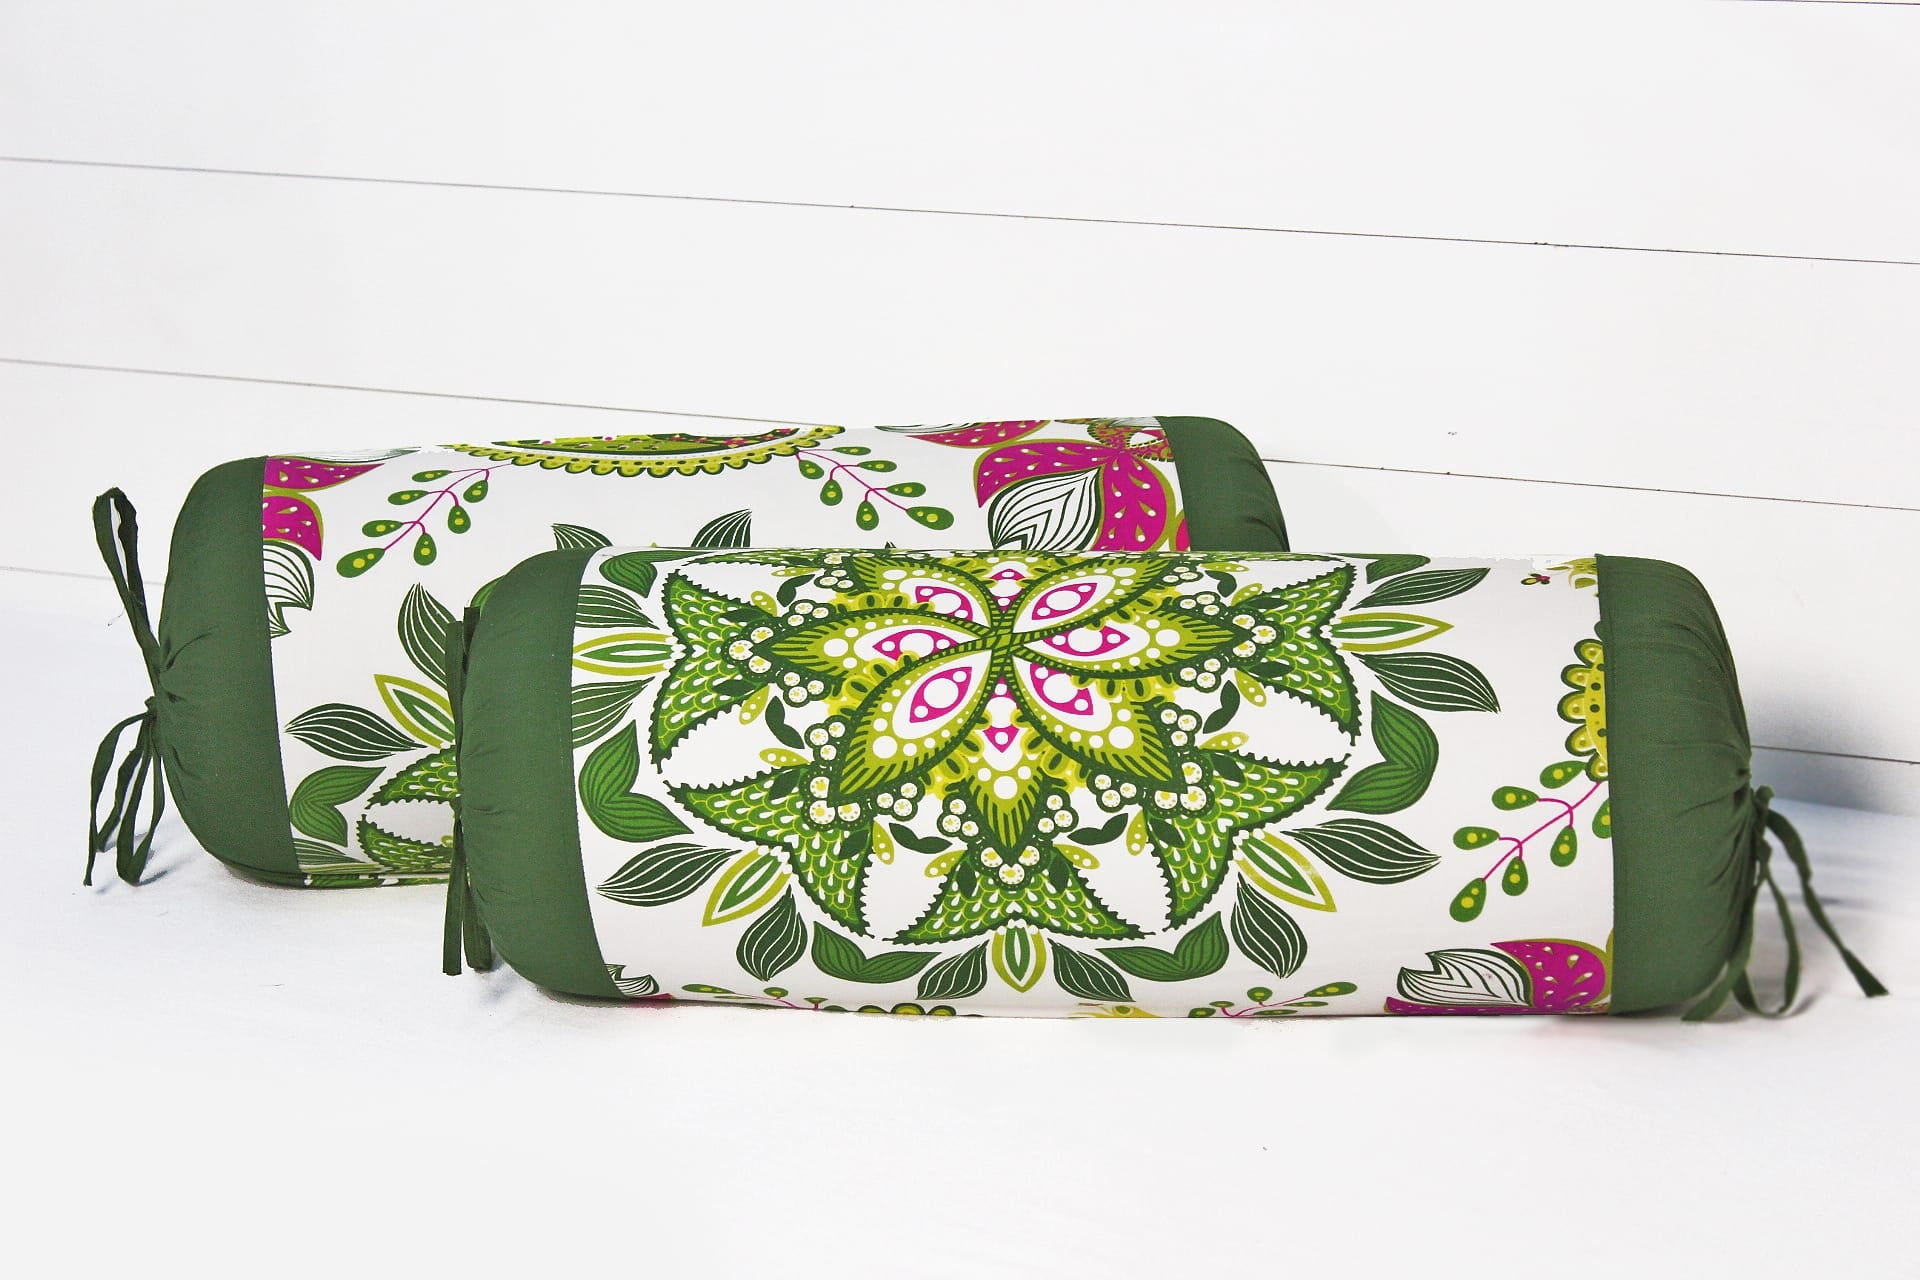 Soft Green Floral Print Cotton Bolster Cover Set (2 Pcs) online in India